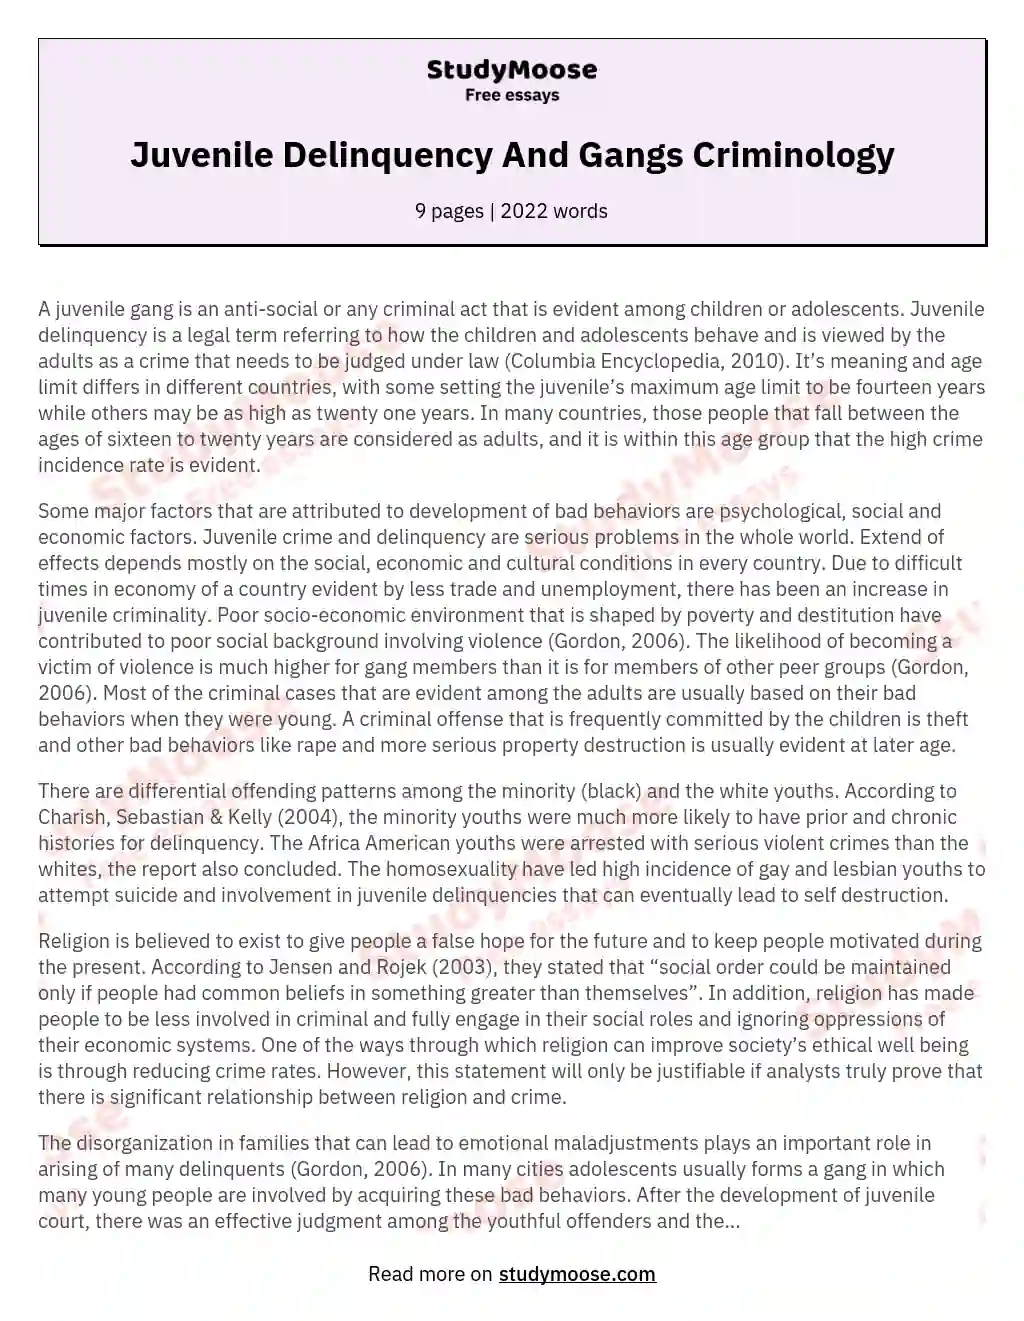 Juvenile Delinquency And Gangs Criminology essay